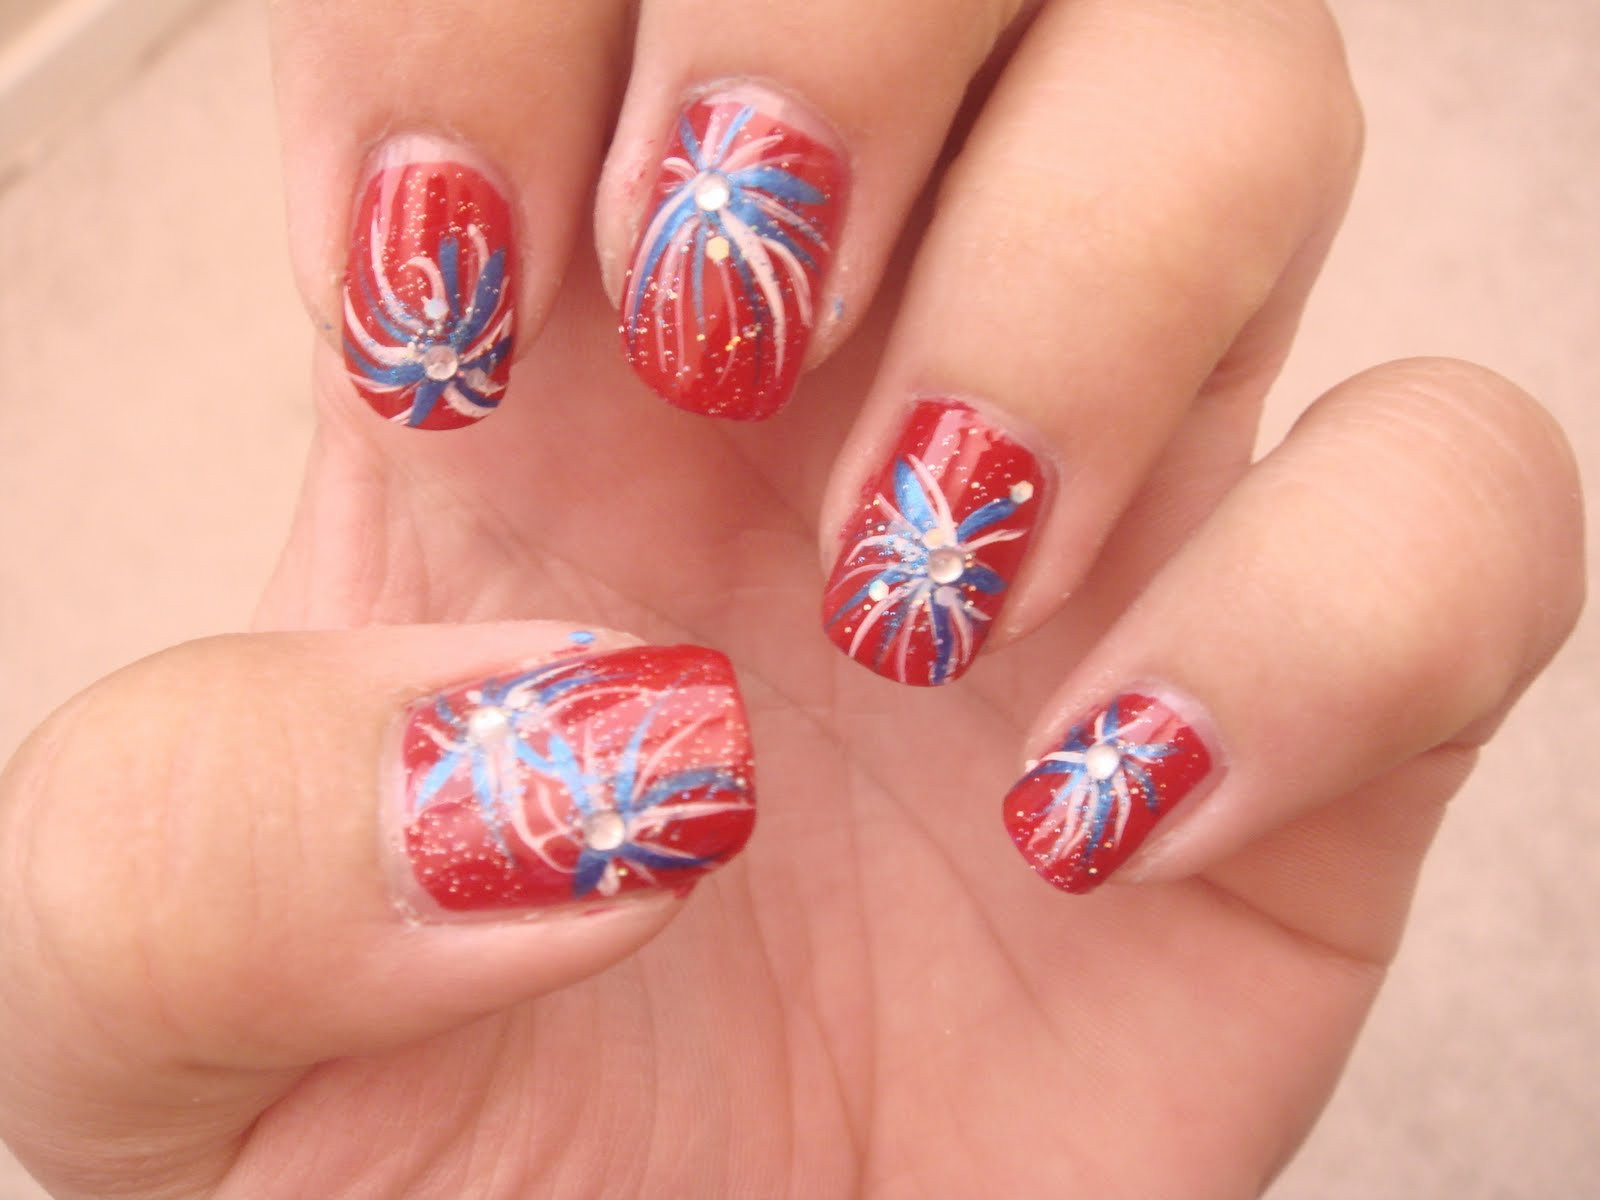 5. Firework Toe Nail Designs for a Sparkling 4th of July - wide 7